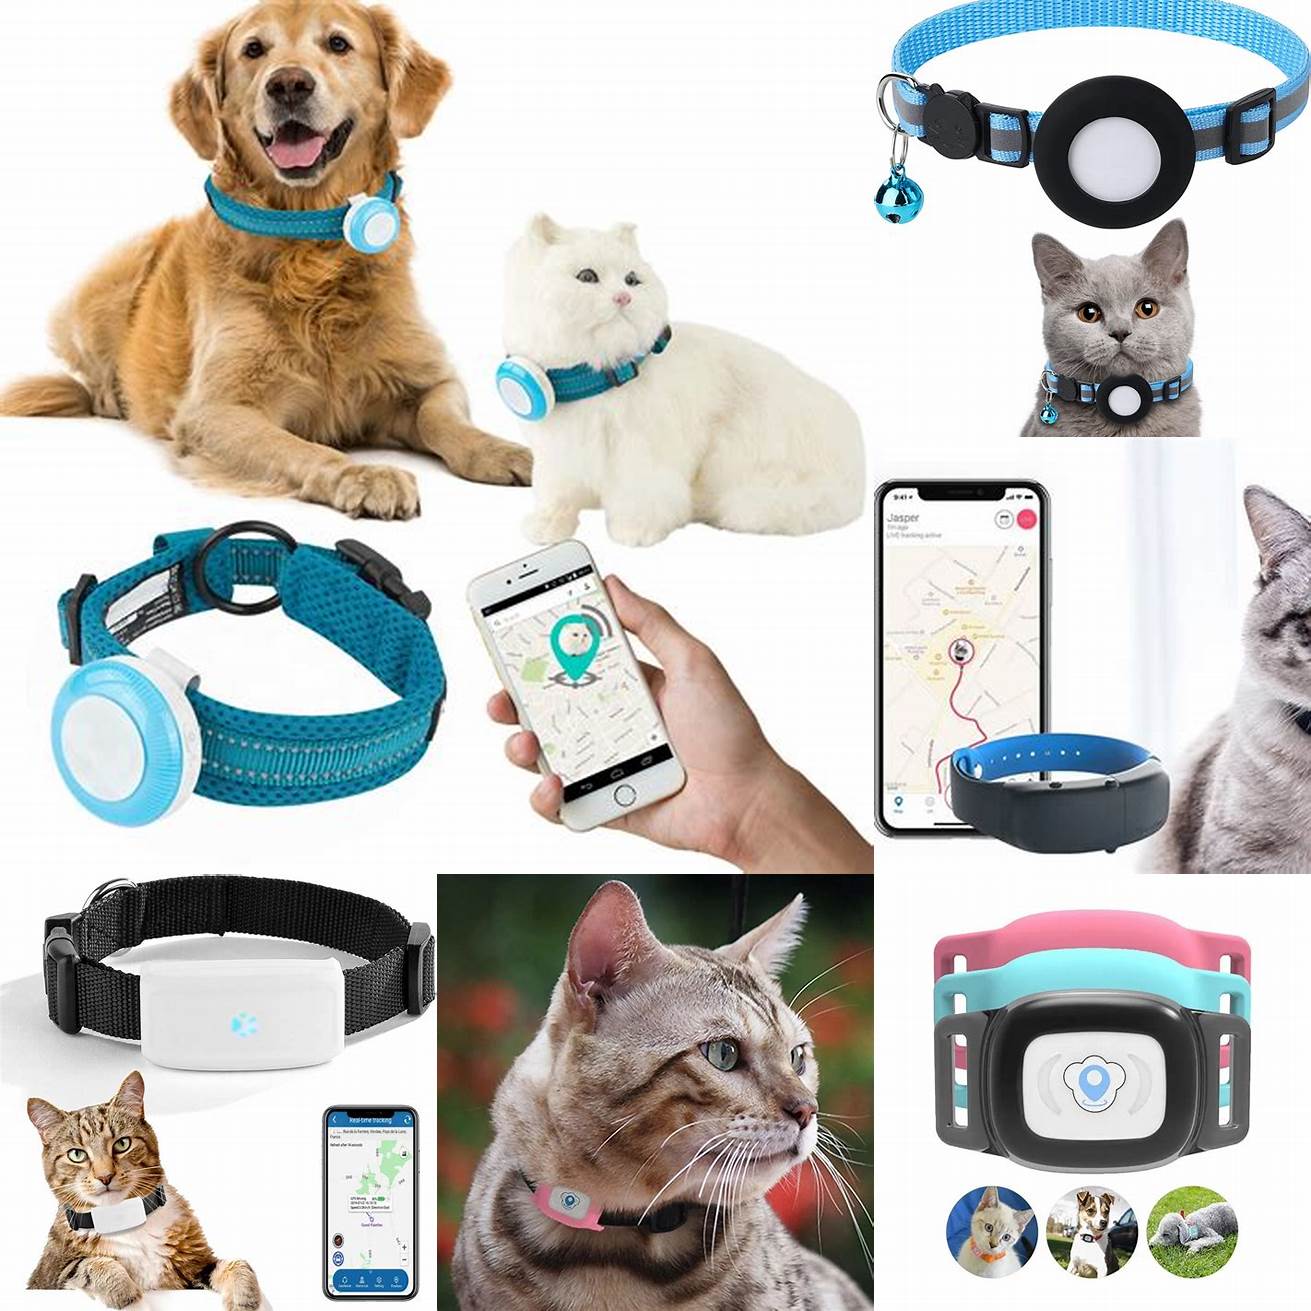 4 Health monitoring Some GPS collars also track your cats activity levels allowing you to monitor their health and fitness